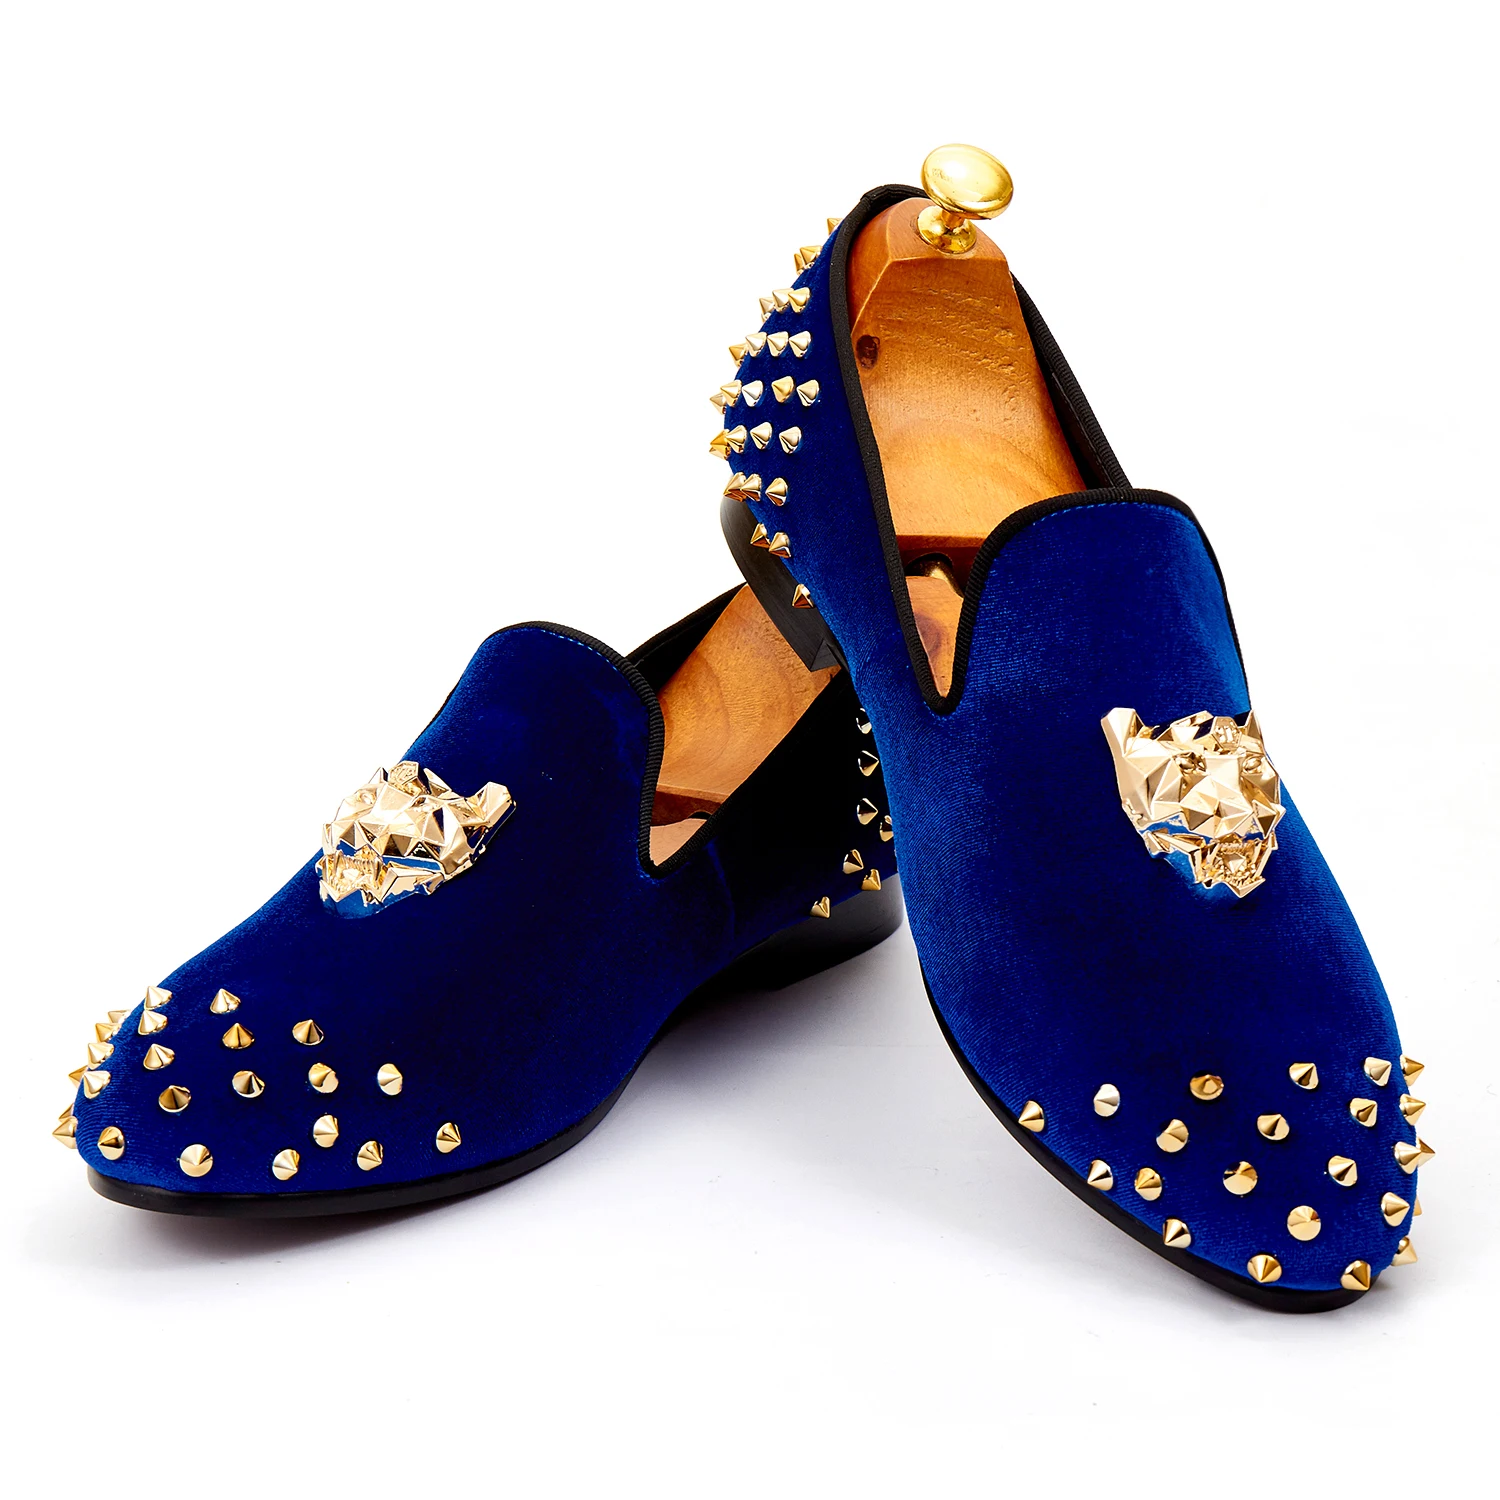 Harpelunde Mens Wedding Shoes Spikes Blue Velvet Loafers Animal Buckle Flat Shoes Size 7-14